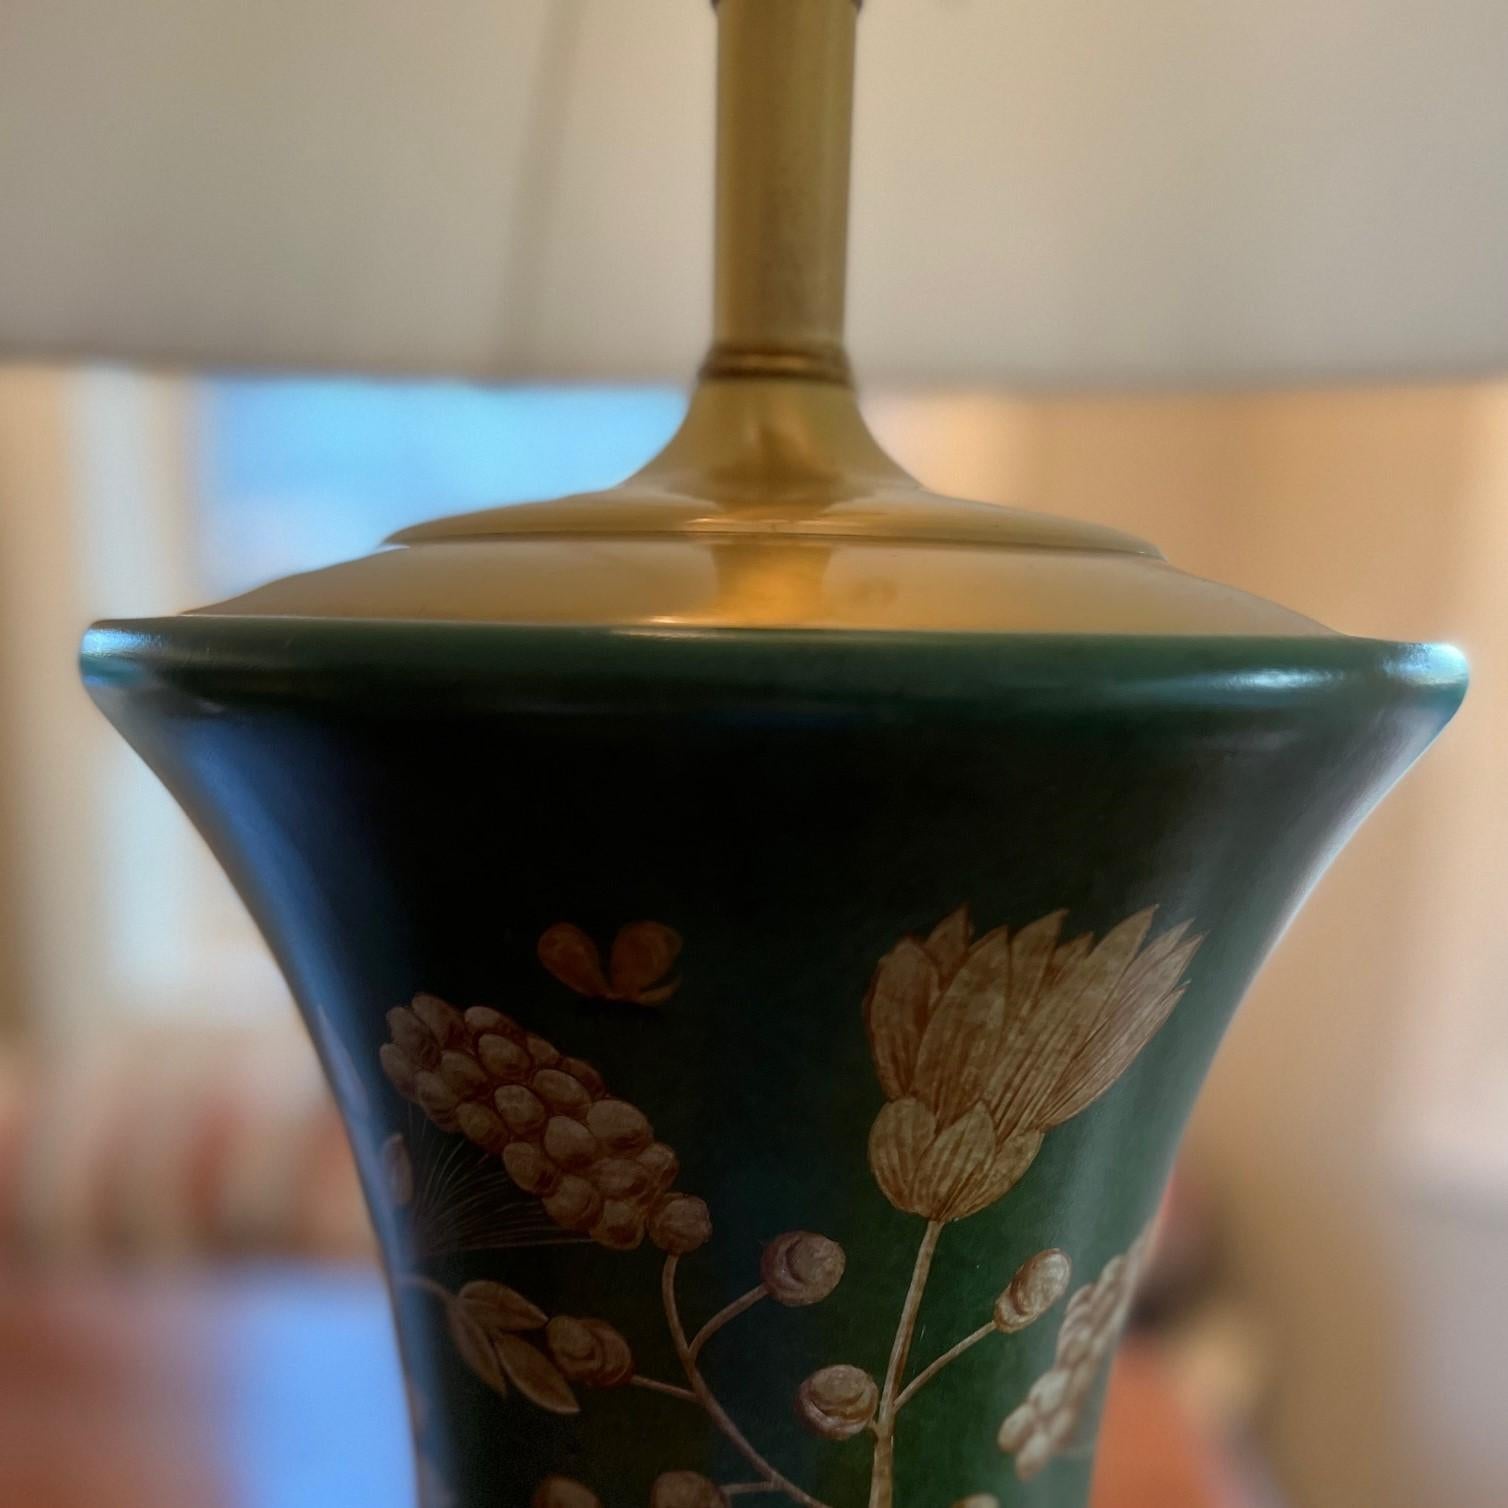 Near Pair of Hand Painted Asian Style Table Lamps - Schumacher Furnishings In Good Condition For Sale In Morristown, NJ